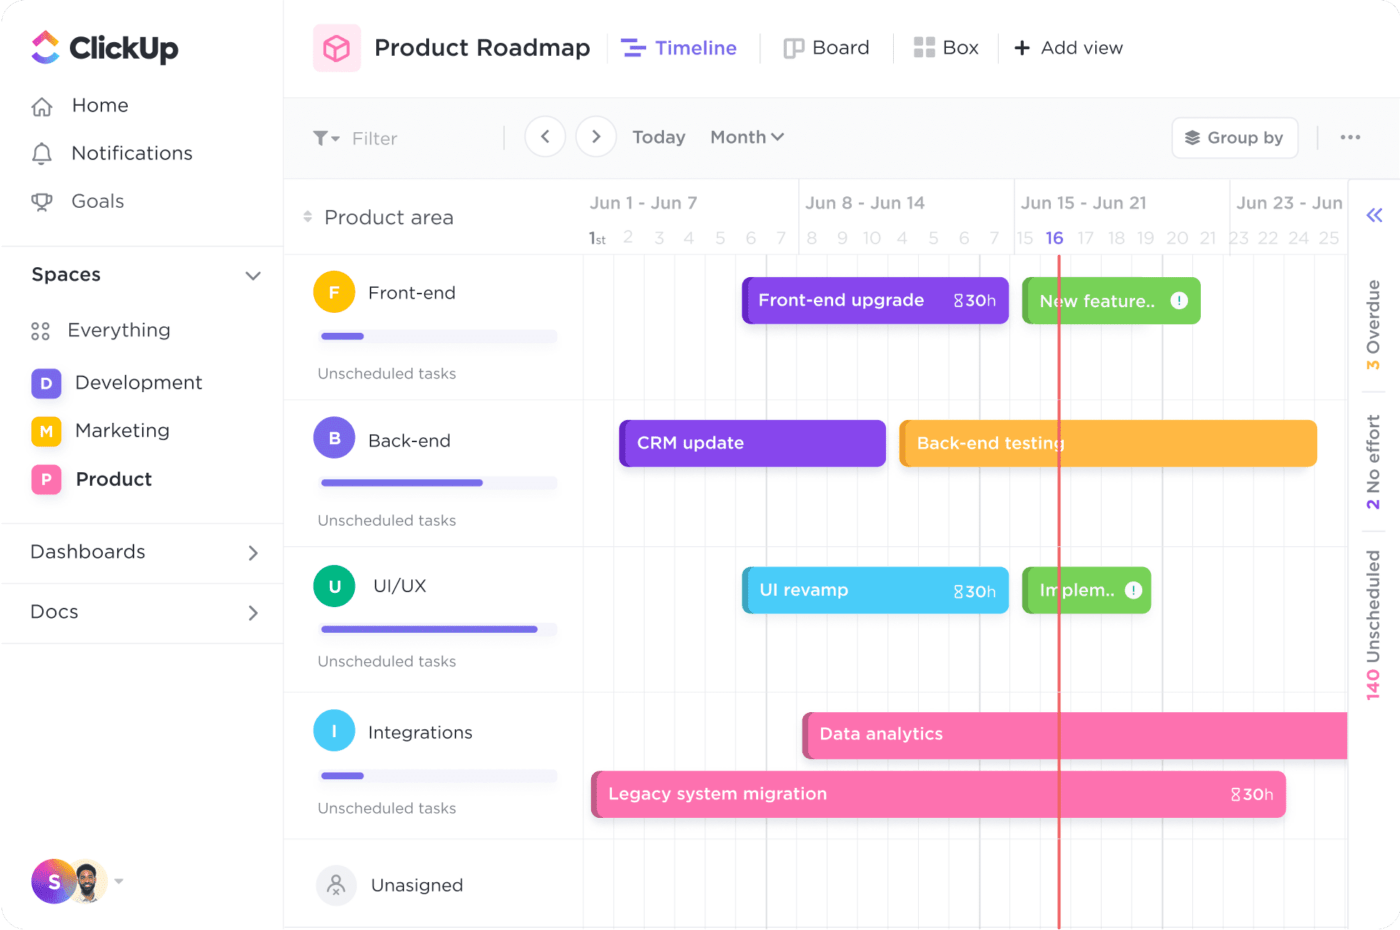 ClickUp Roadmap in Timeline View